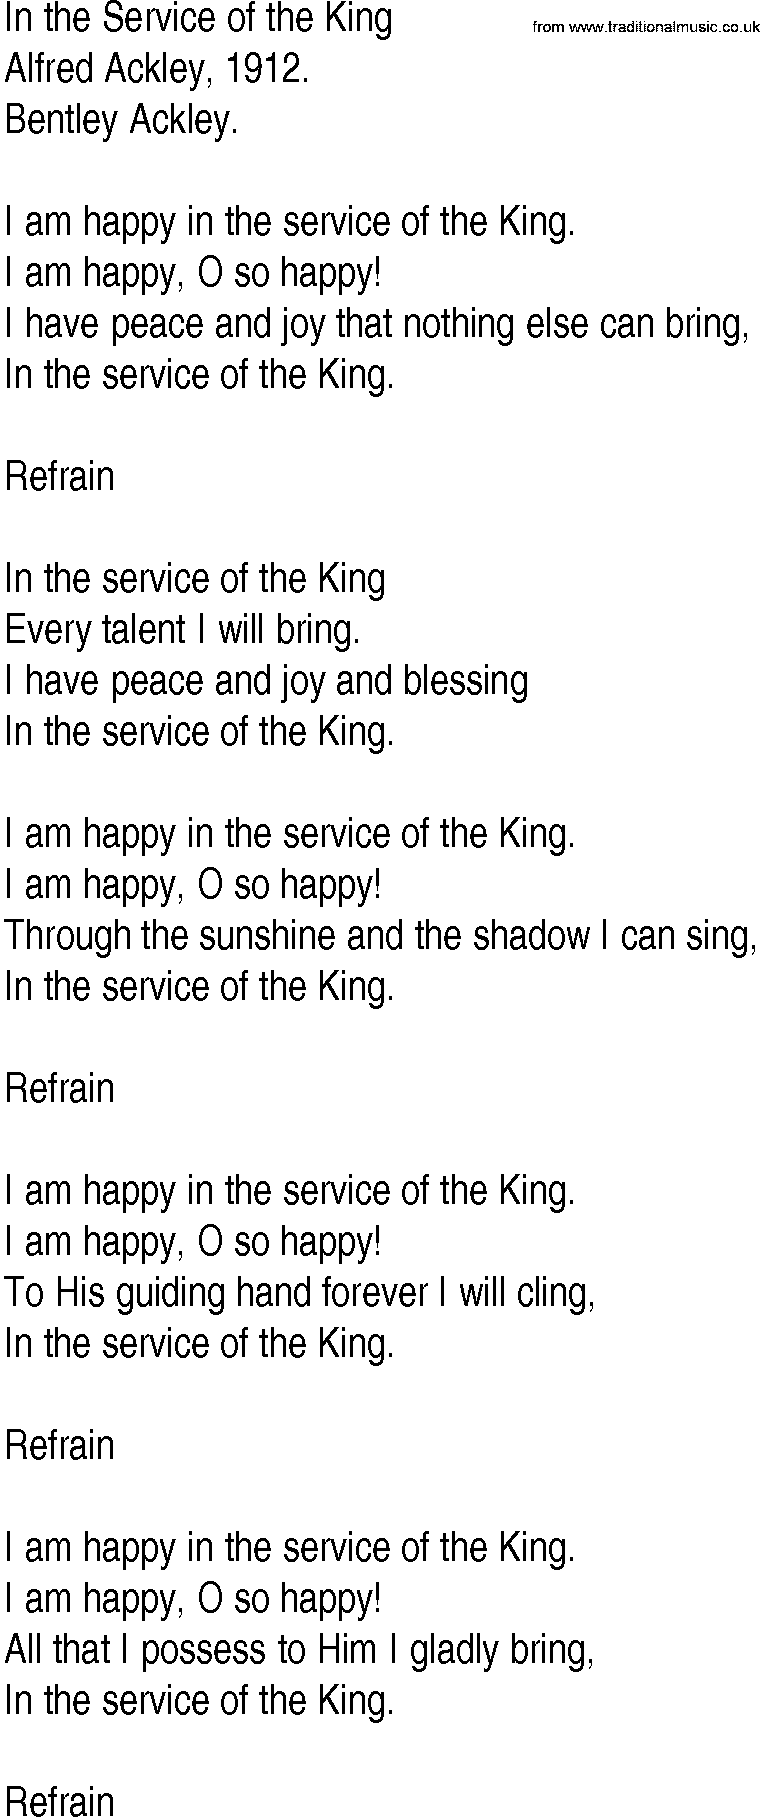 Hymn and Gospel Song: In the Service of the King by Alfred Ackley lyrics